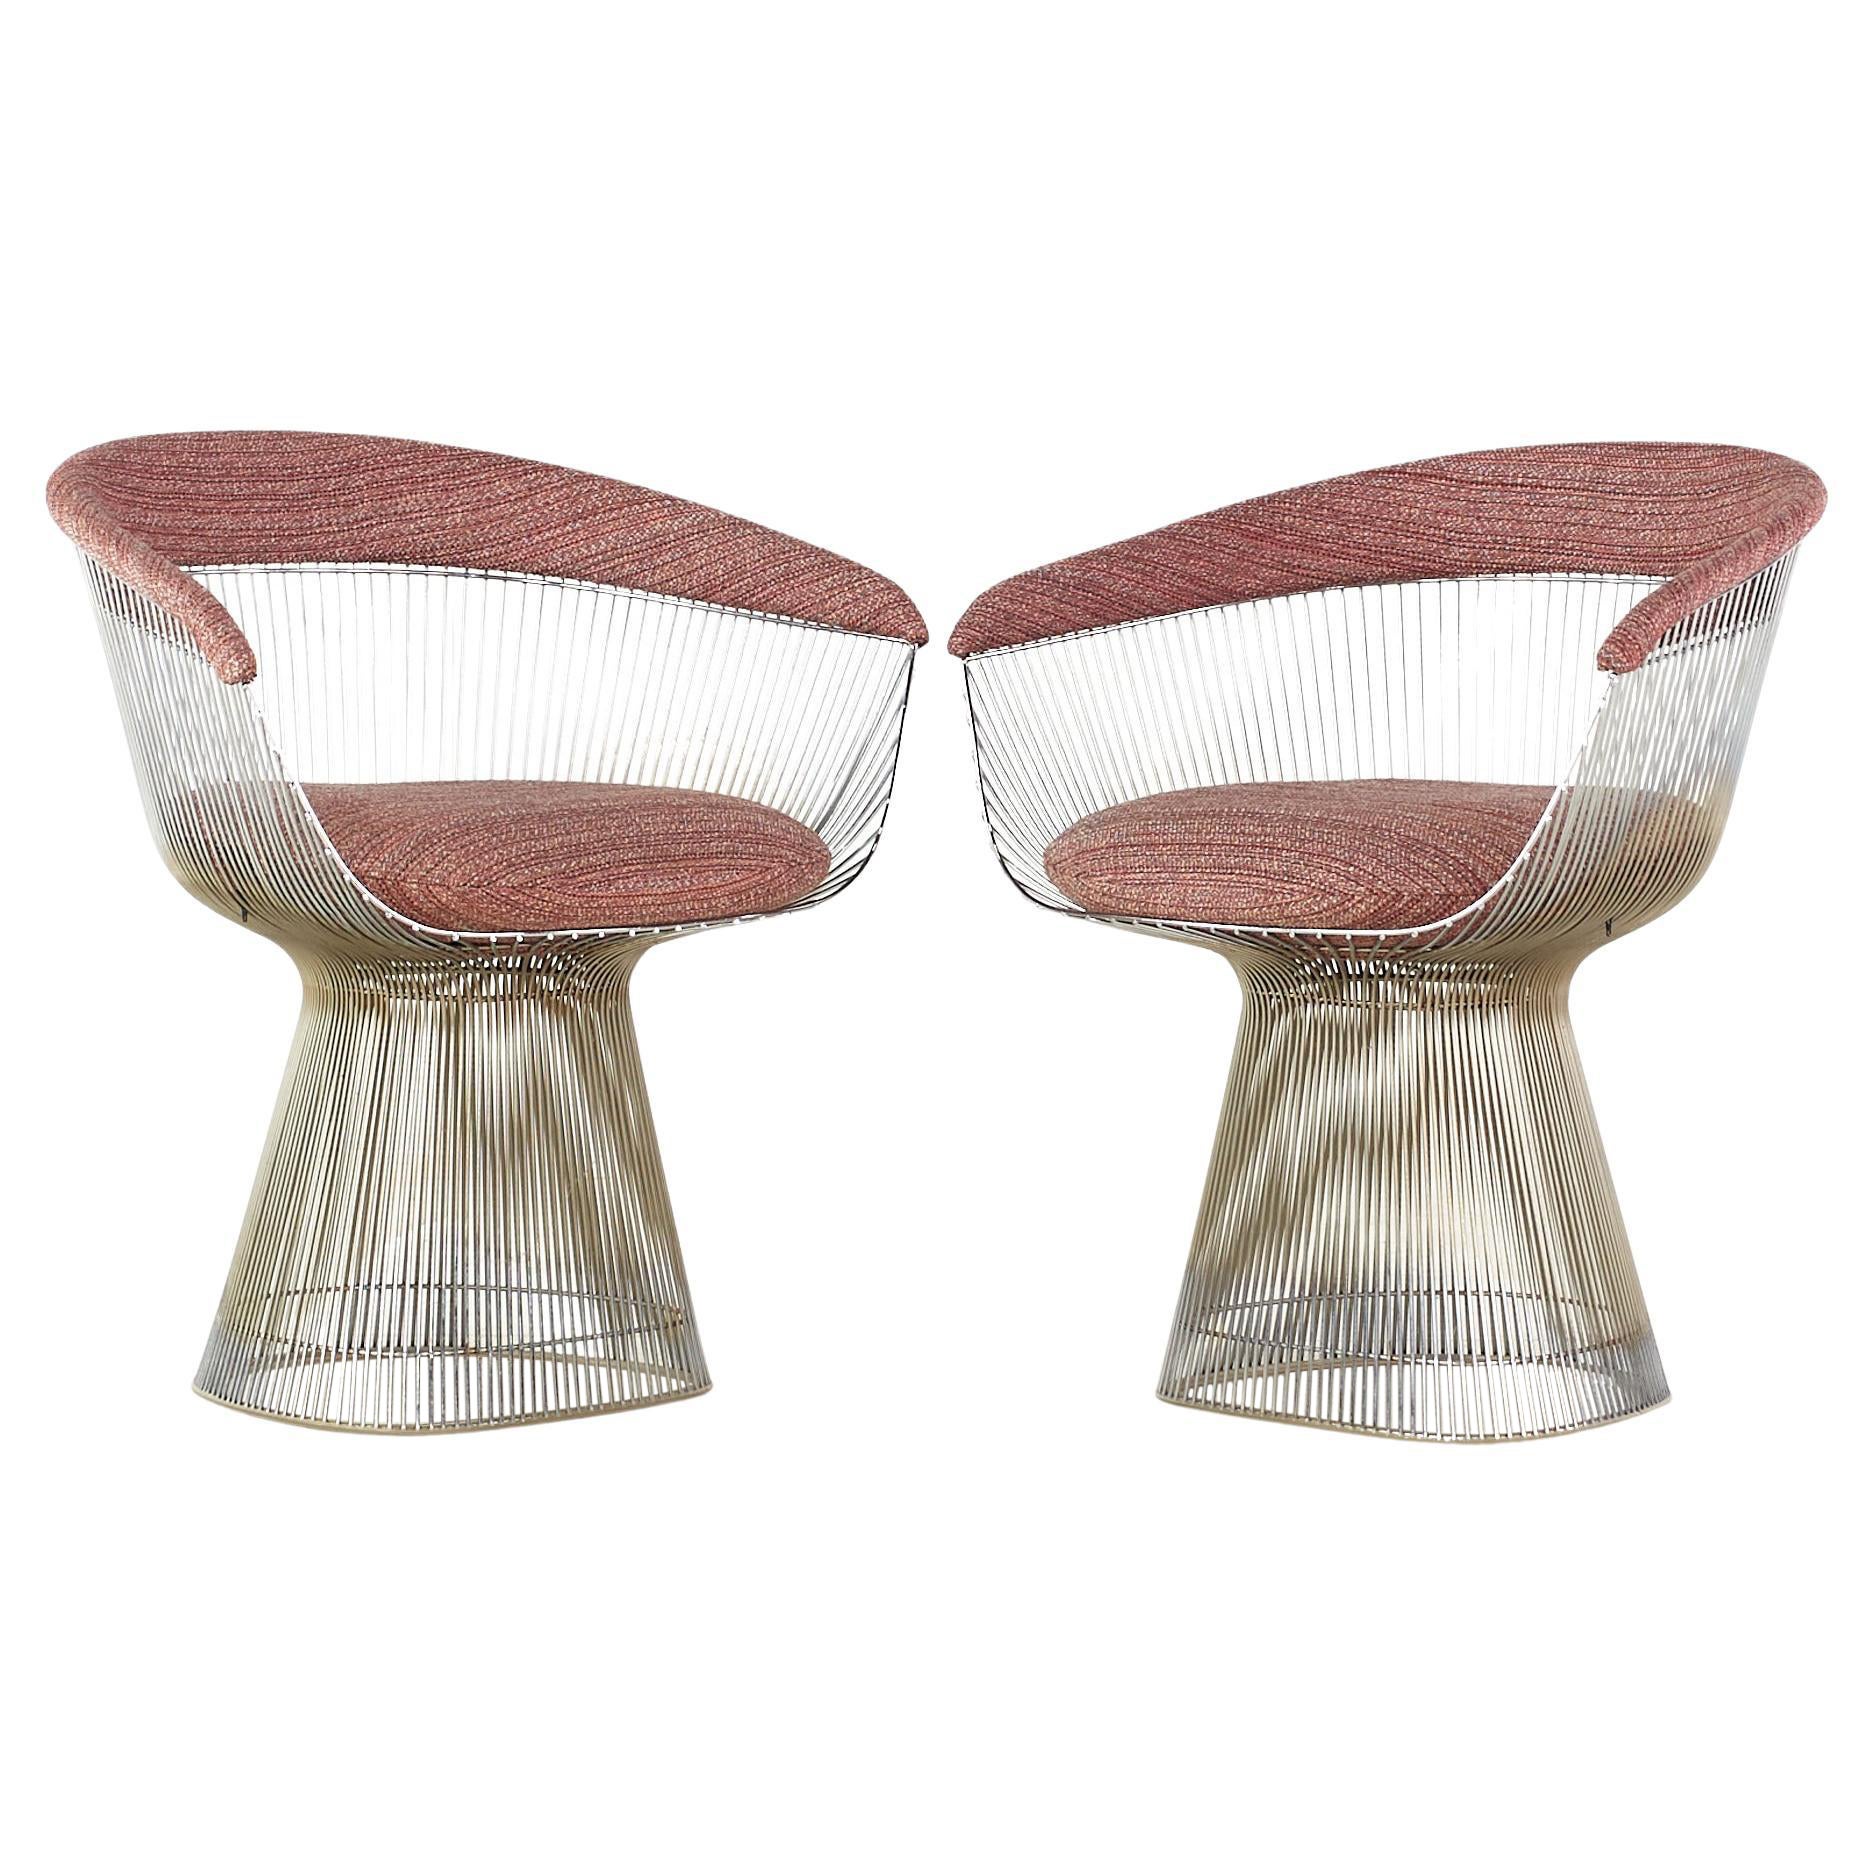 Warren Platner for Knoll Mid Century Dining Chairs, Pair